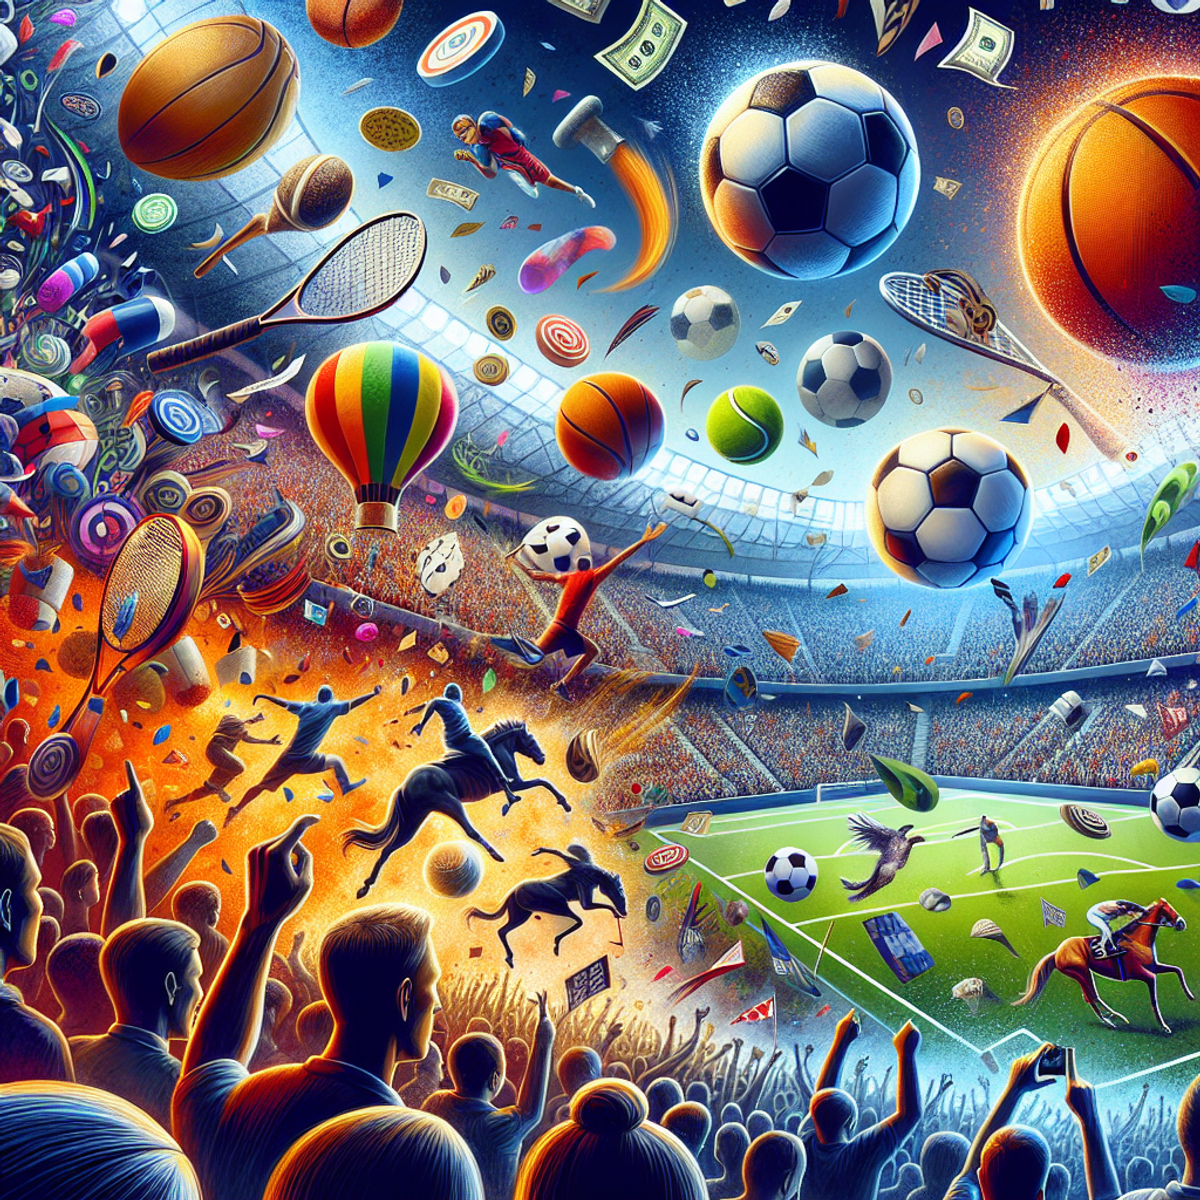 A crowded sports stadium with diverse fans, featuring symbols of soccer, basketball, tennis, and horse racing, capturing the excitement of sports bett